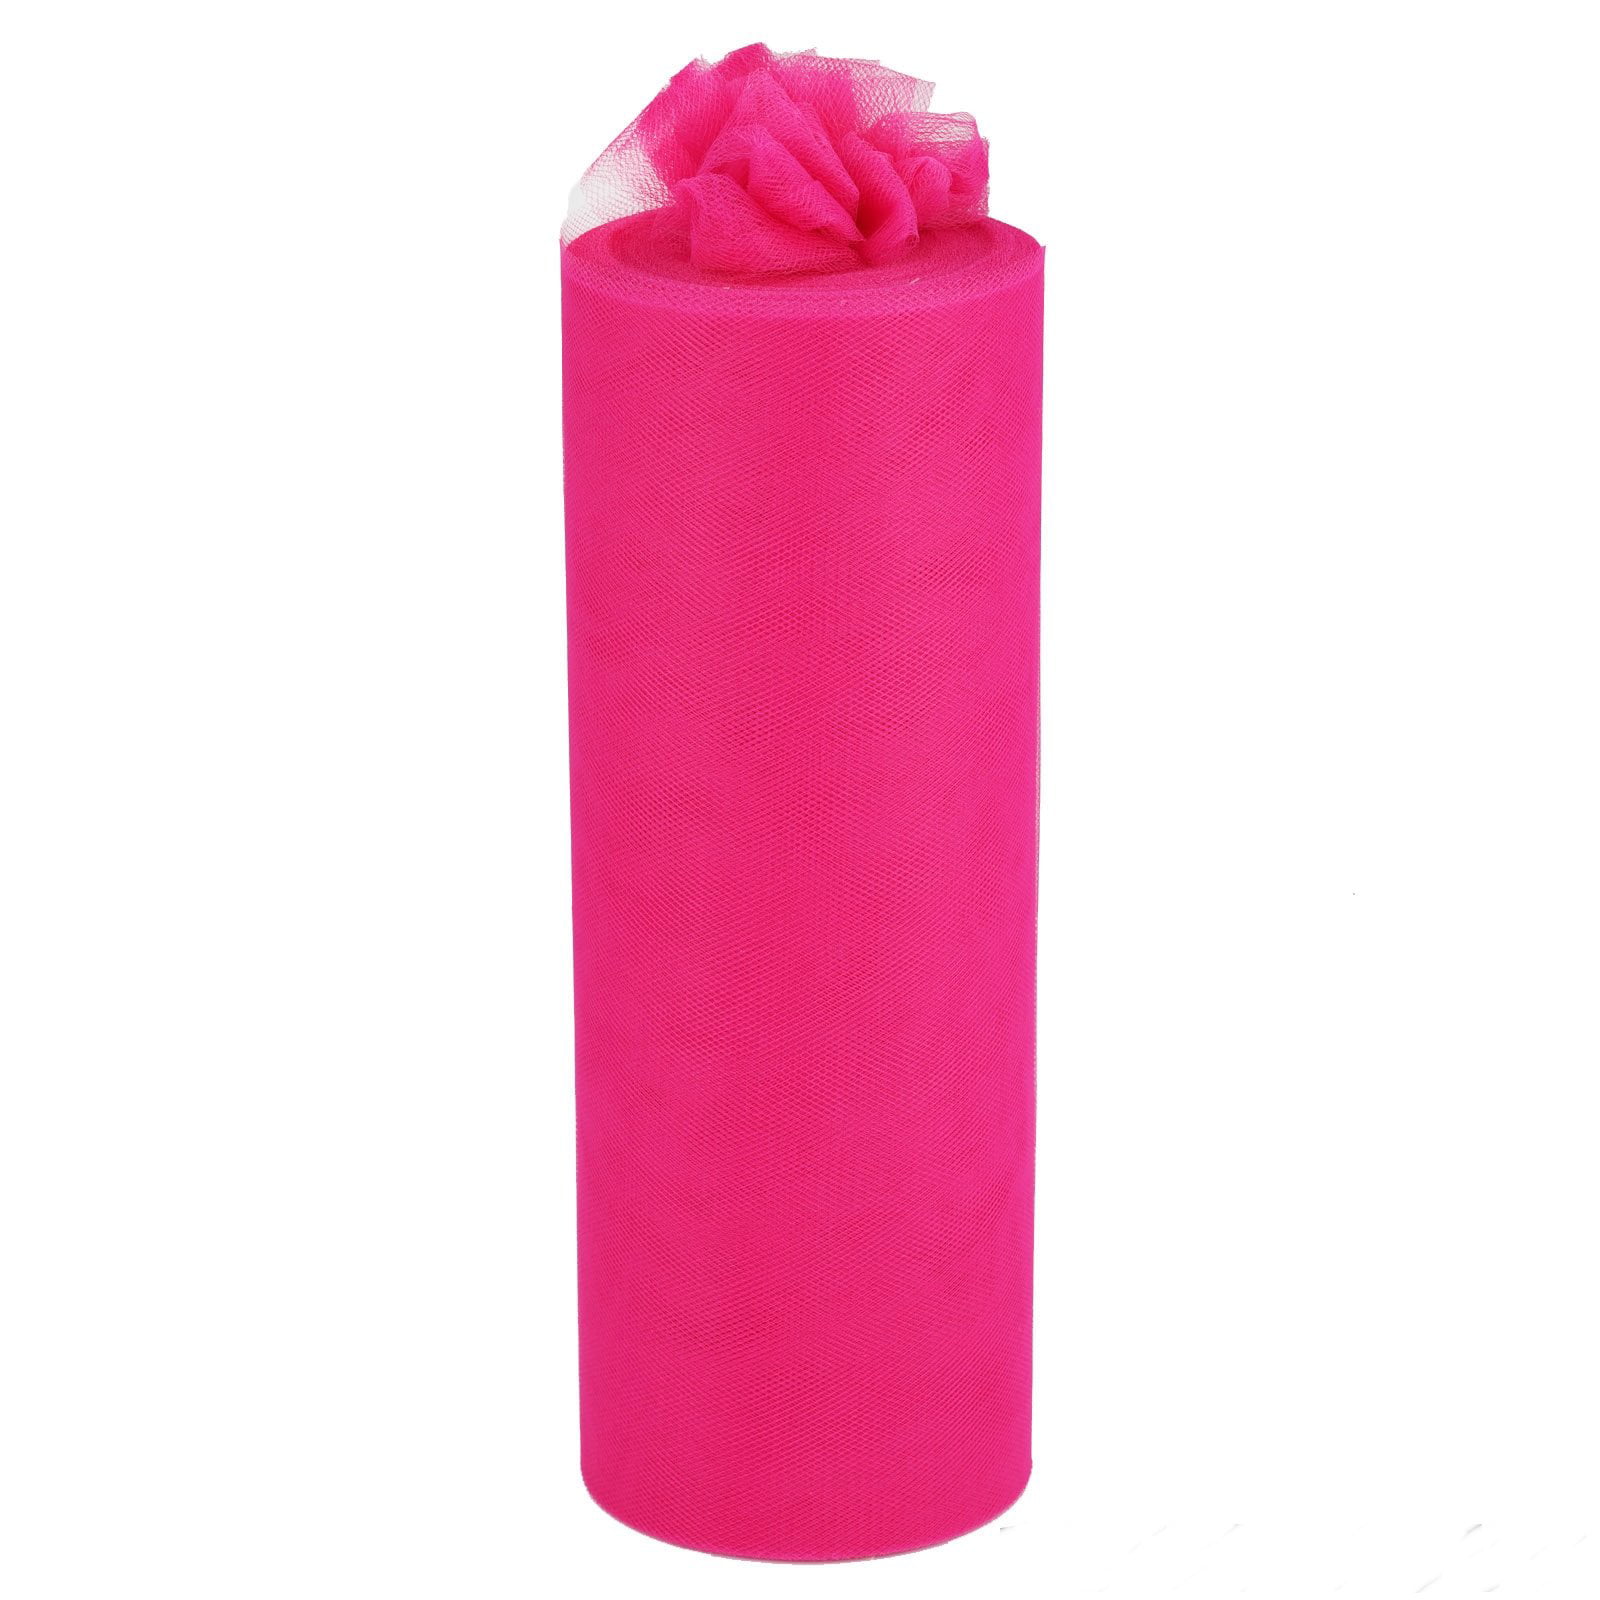 2 Rolls of Tulle Rolls Polyester Netting Rolls Fabric Ribbons Tulle for Banquet 